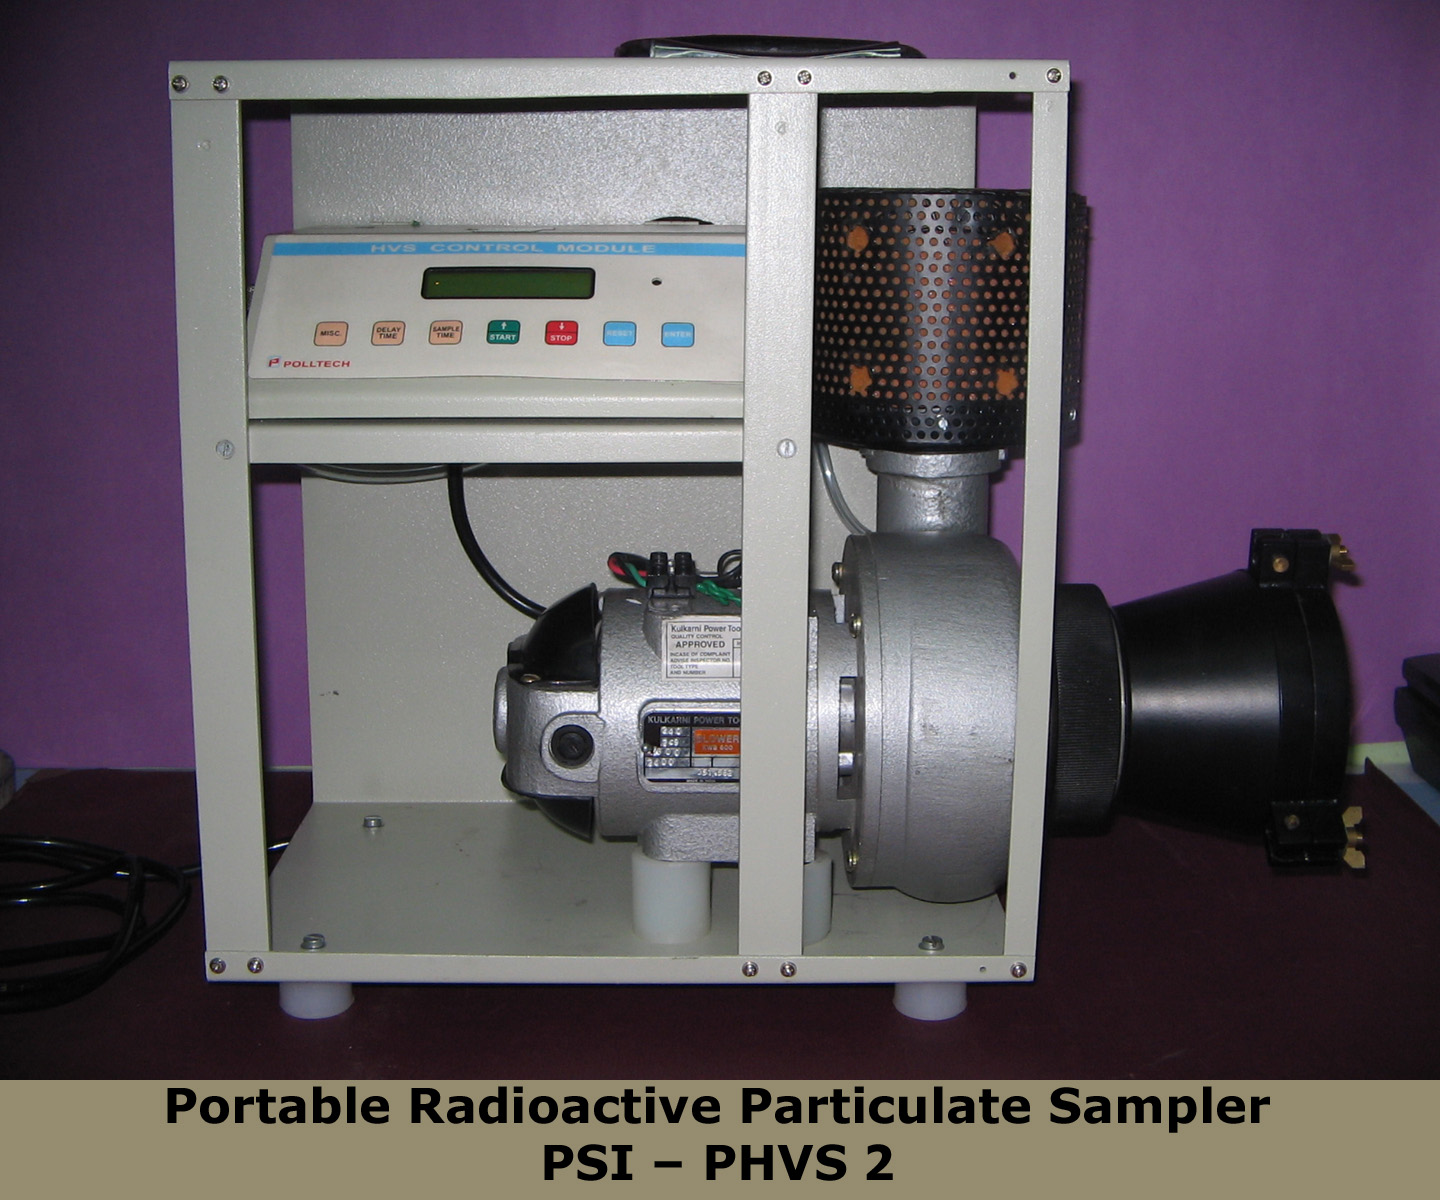 Portable Radioactive Particulate Sampler